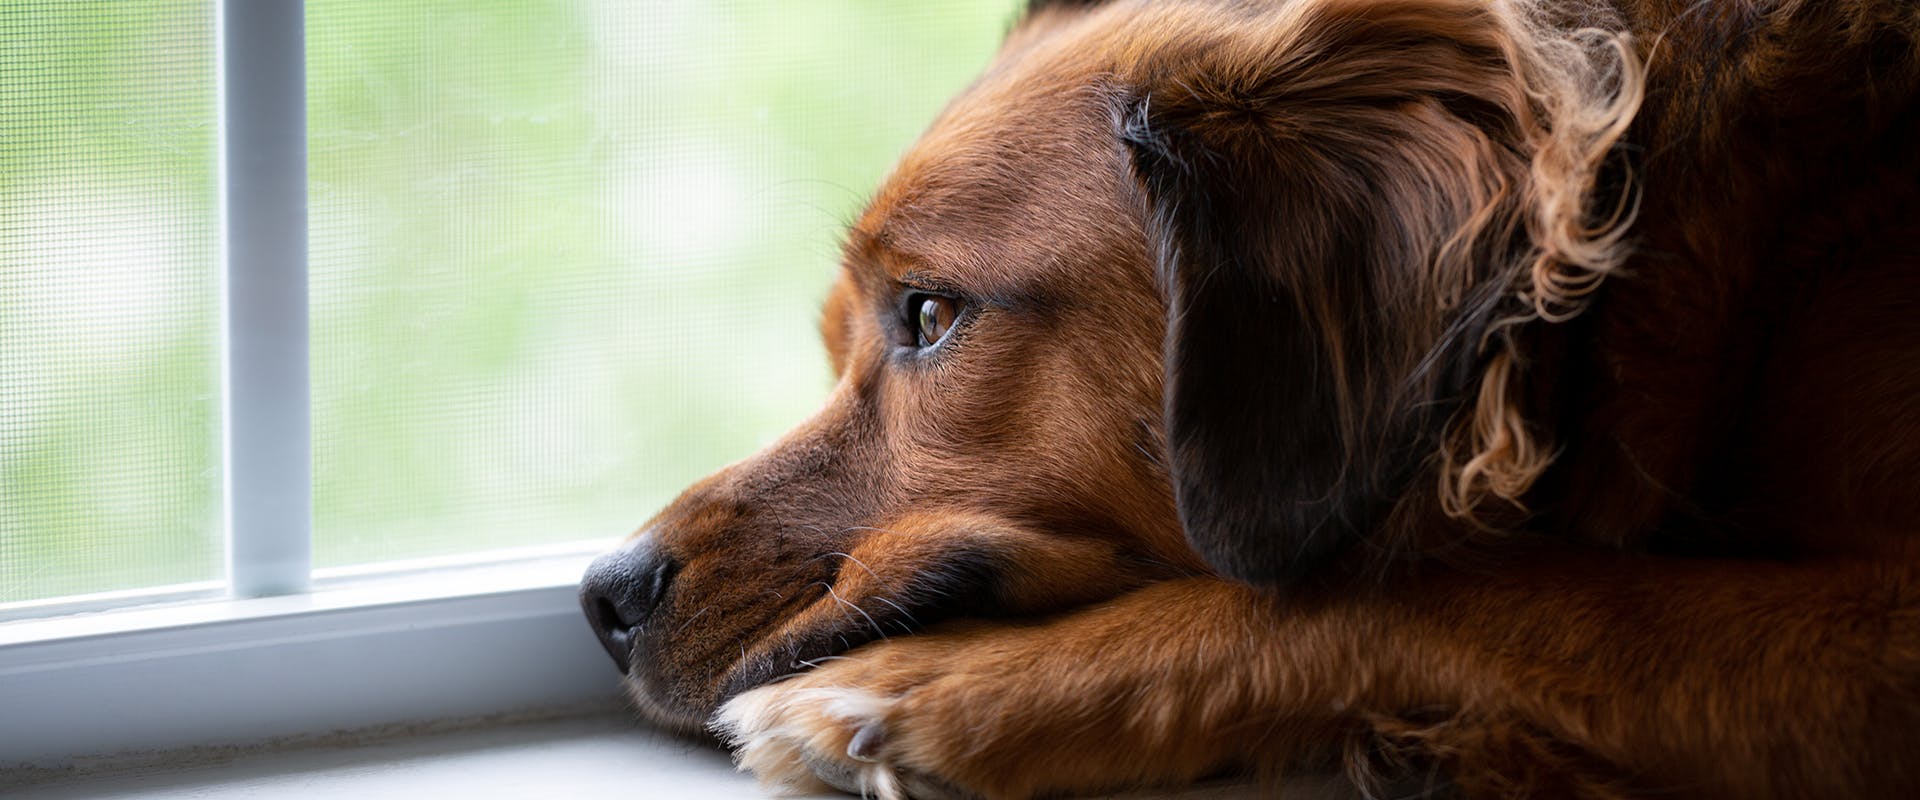 A dog resting its head and paws on a windowsill looking out of the window